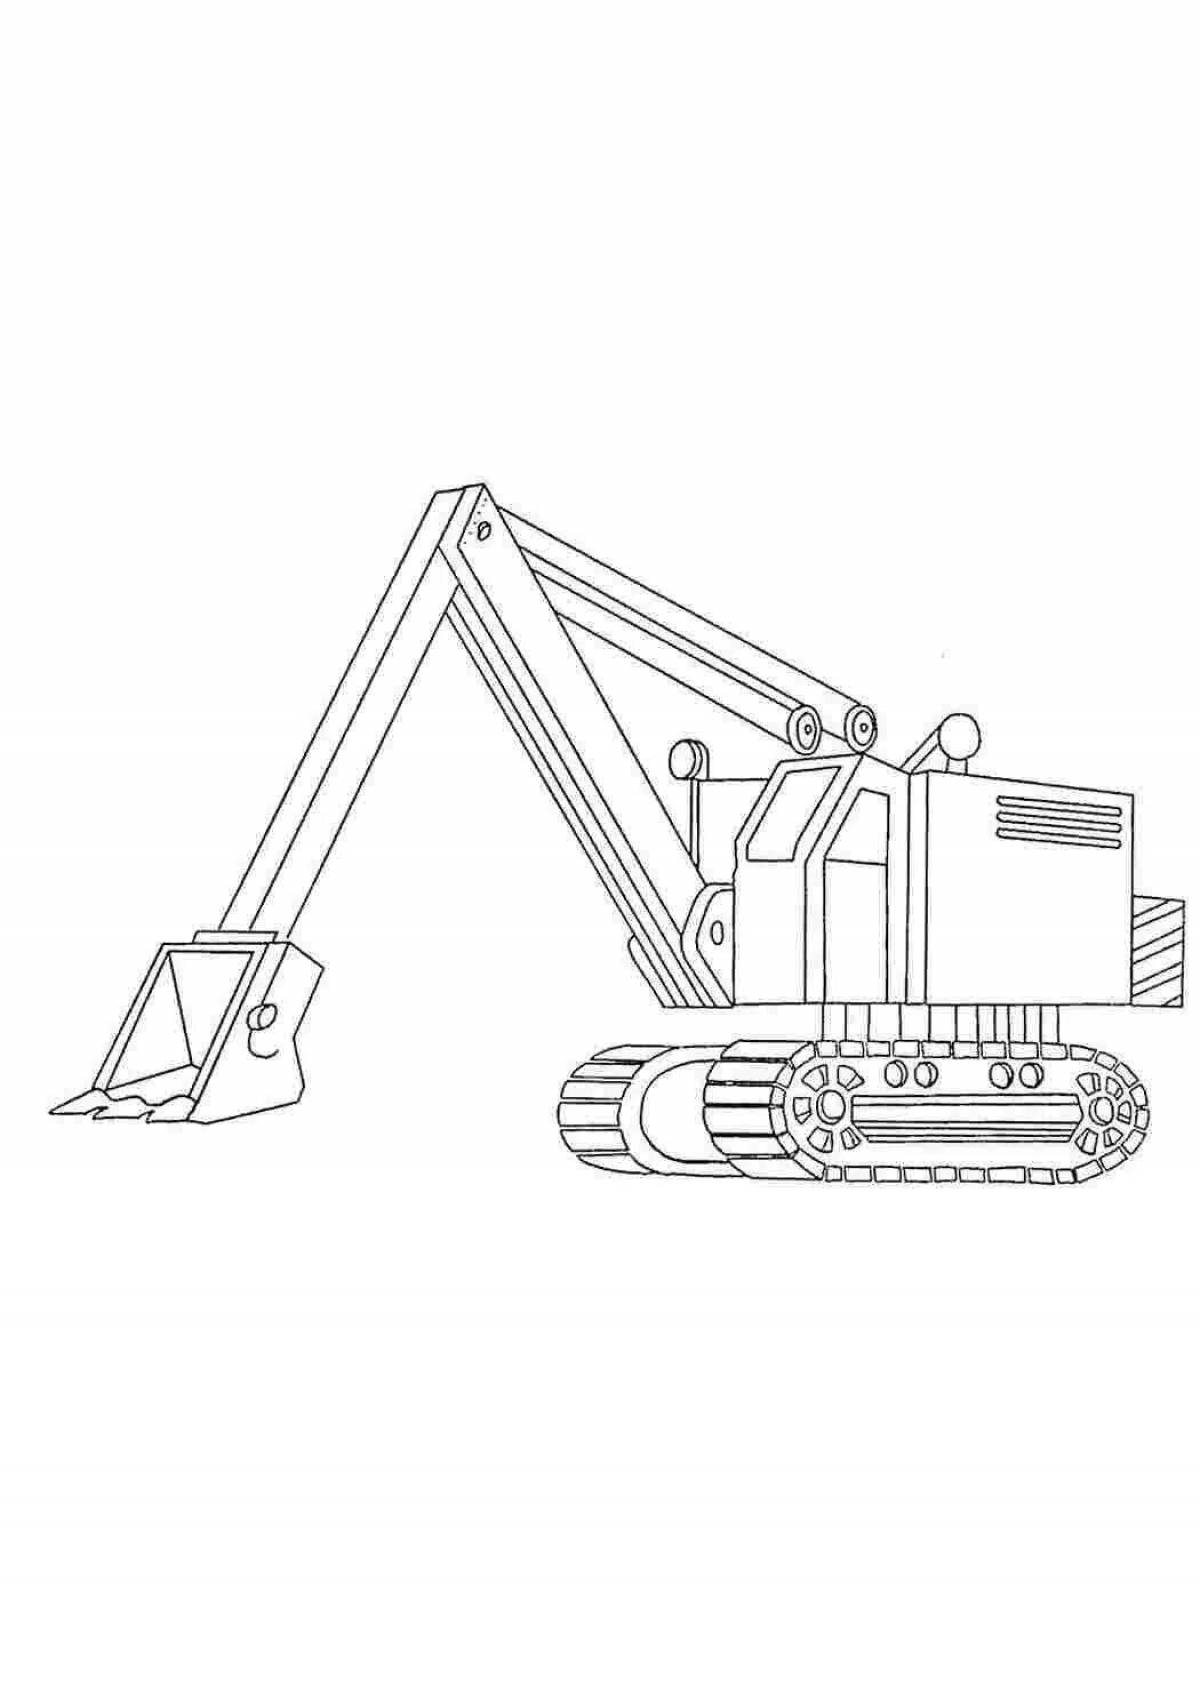 Adorable excavator coloring book for 5-6 year olds